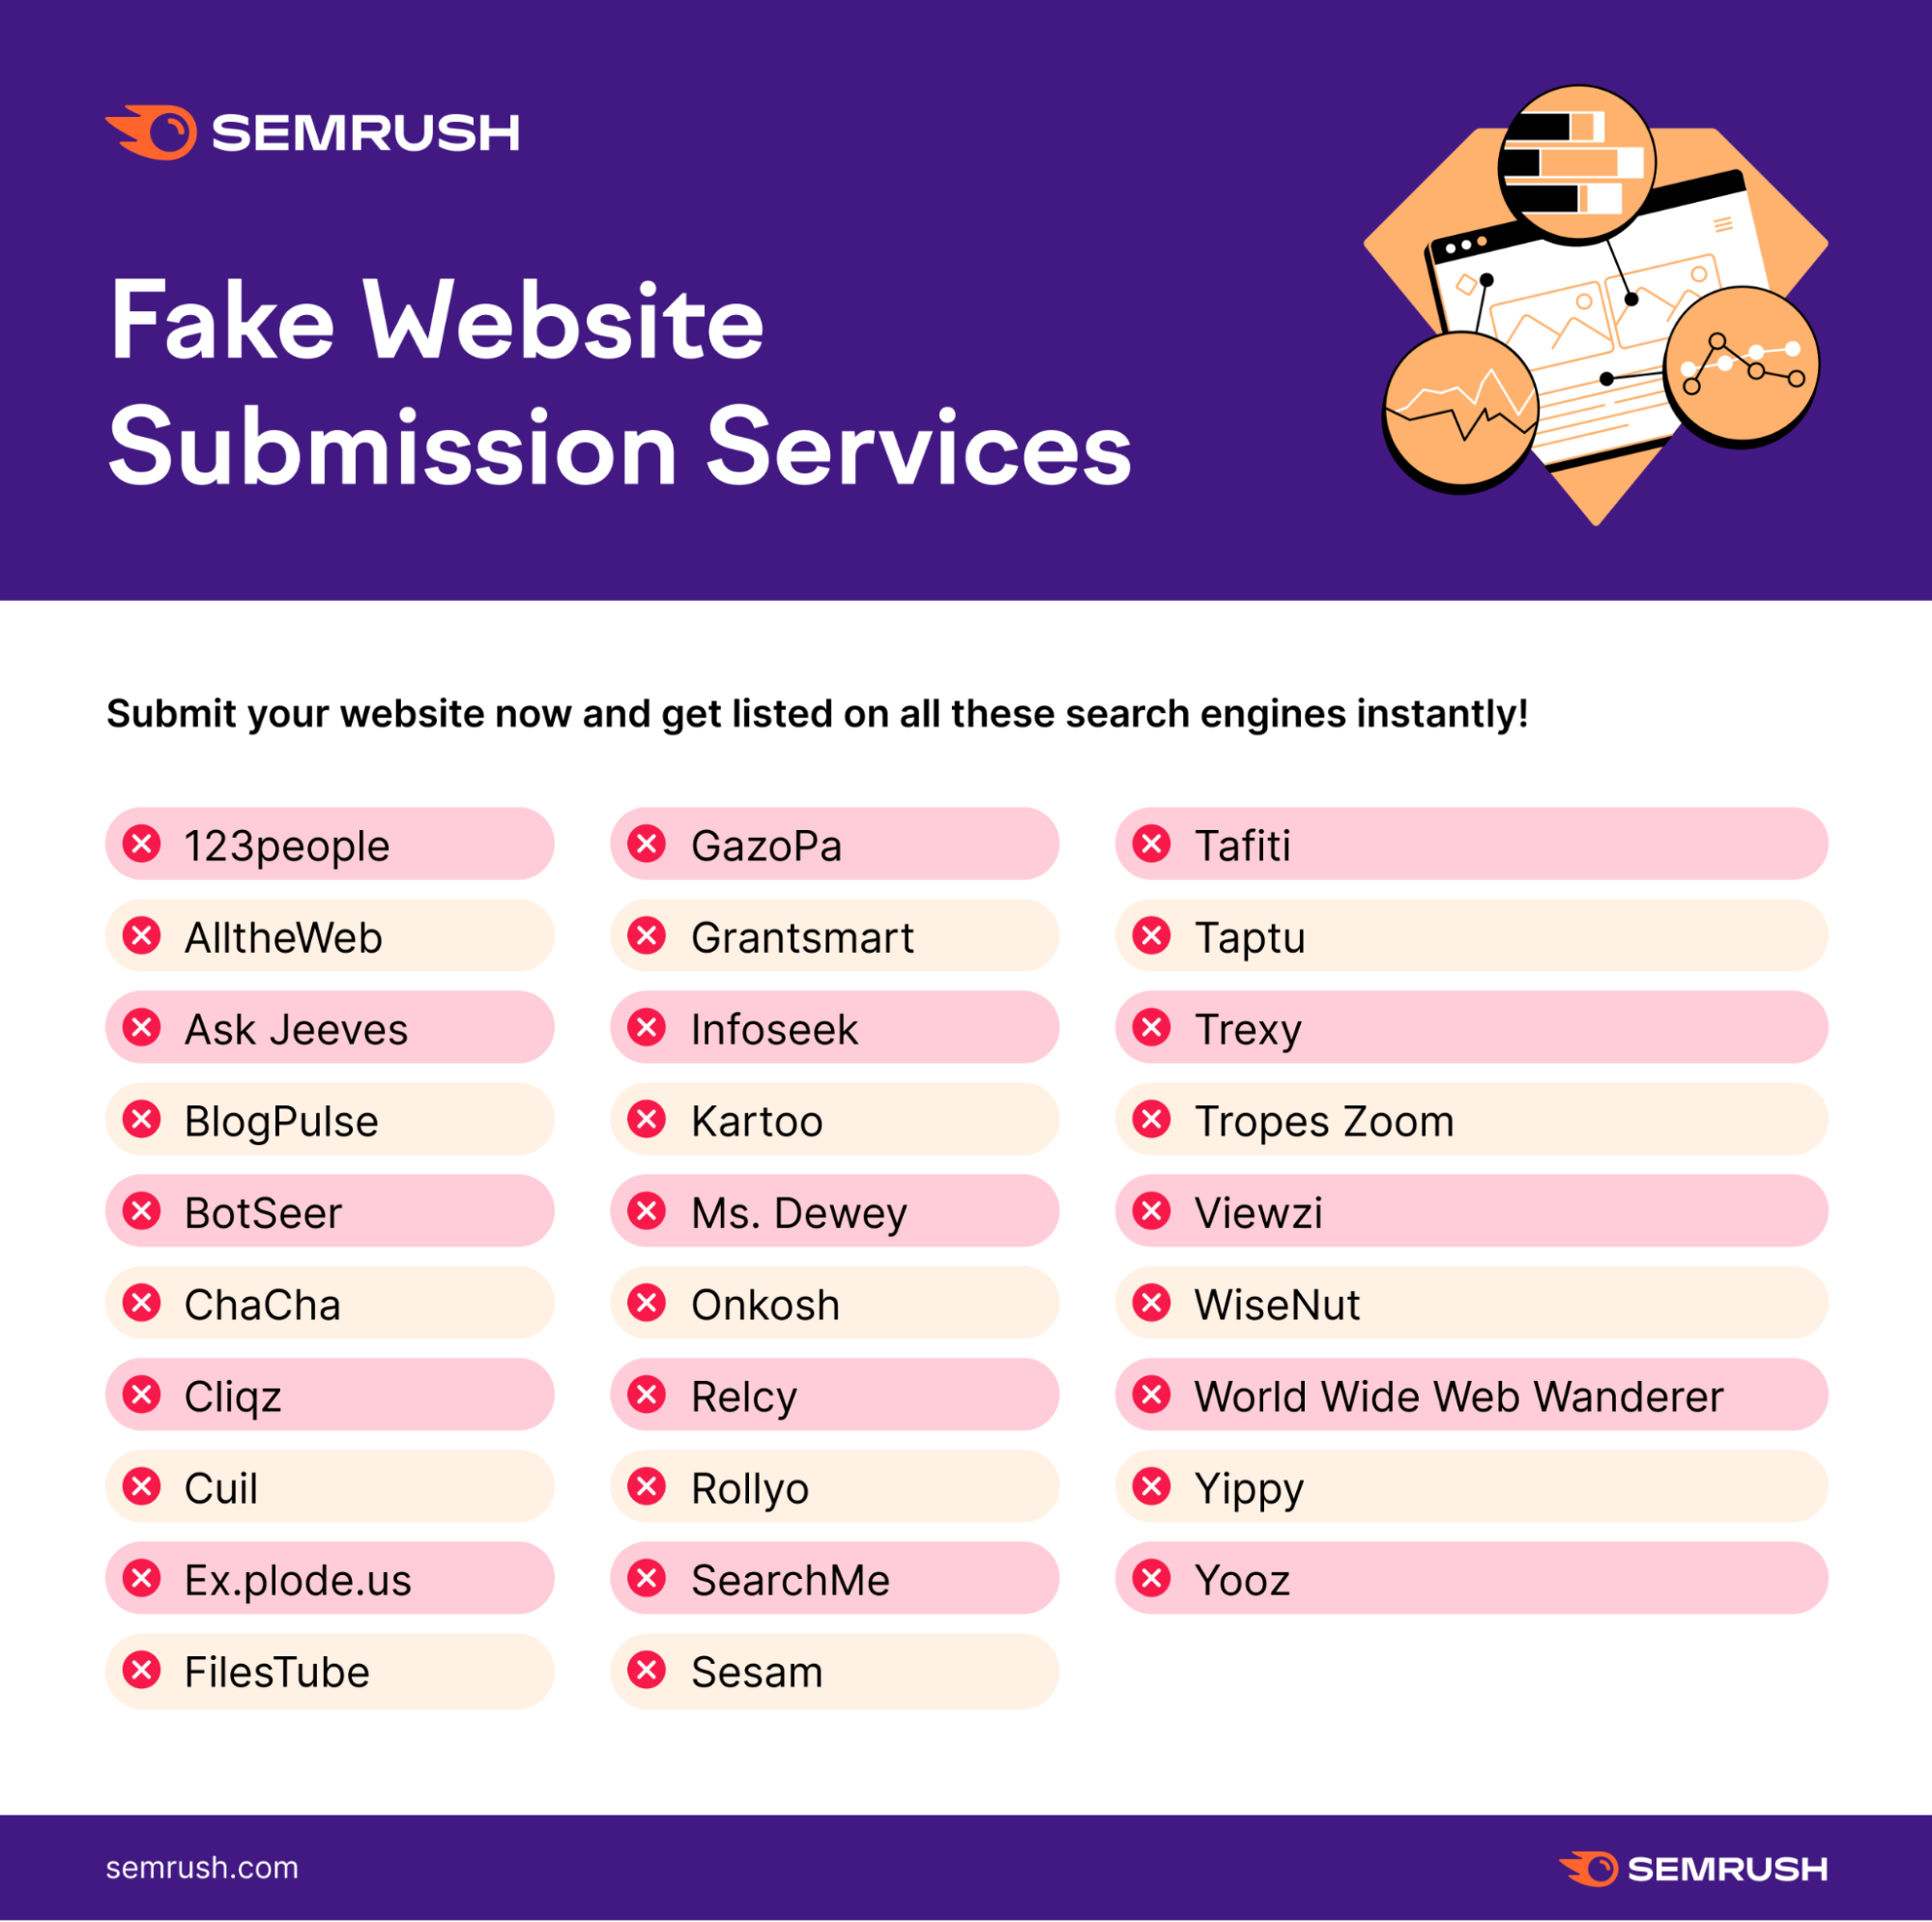 Illustration of a fake website submission service